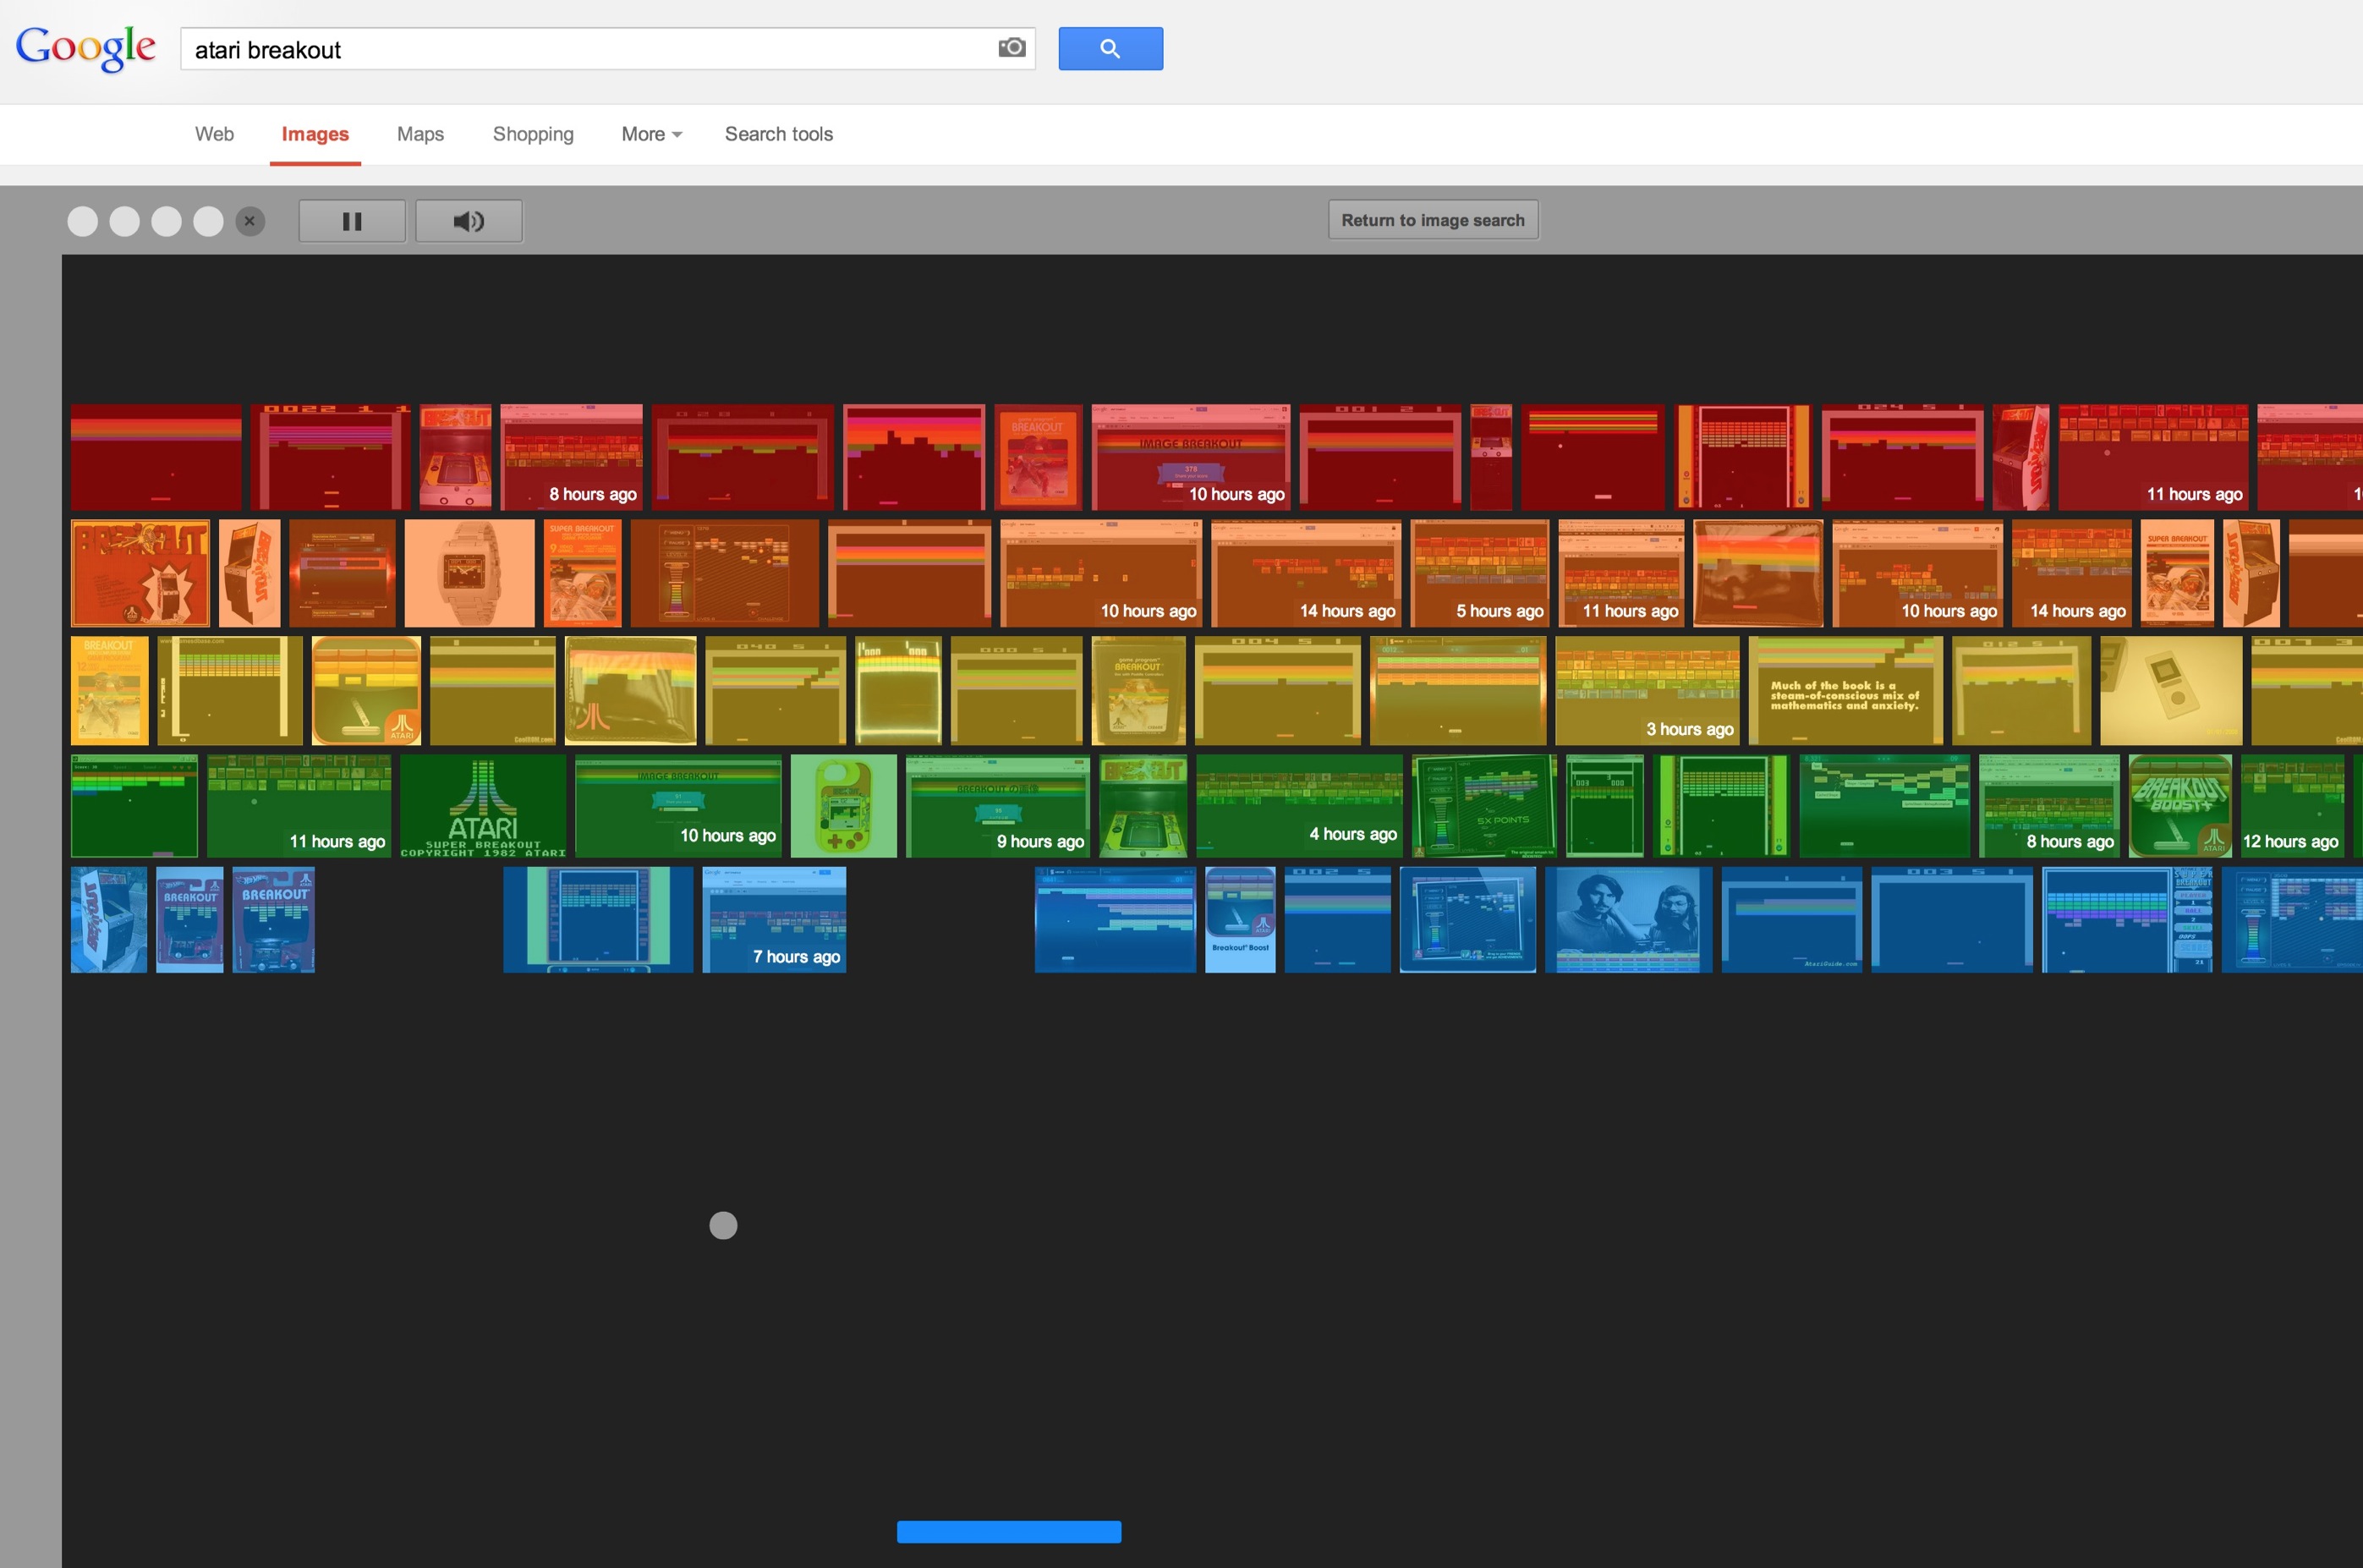 You can play Atari Breakout on Google Image Search right now, and it's as fun as ever